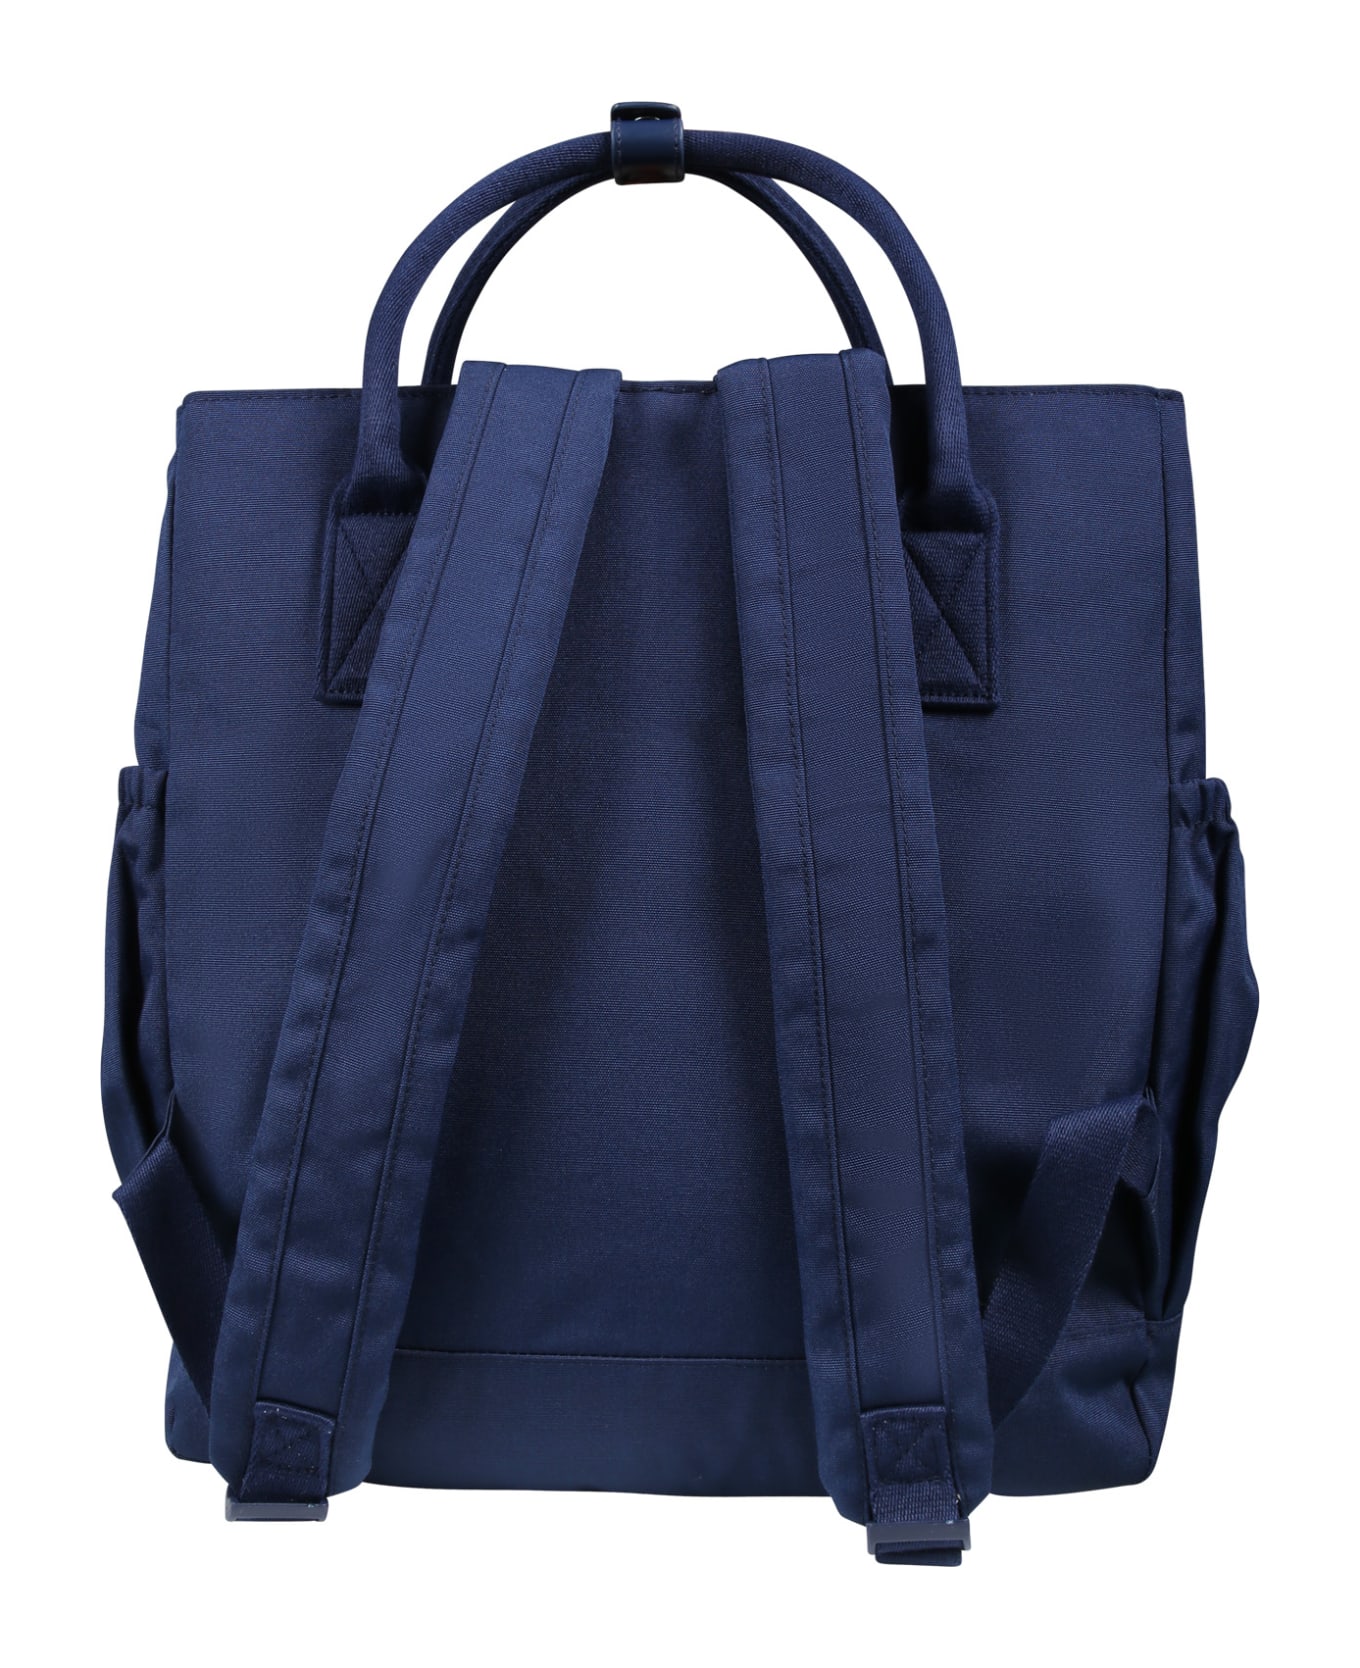 Kenzo Kids Blue Mother Bag For Baby Boy With Logo - Blue アクセサリー＆ギフト